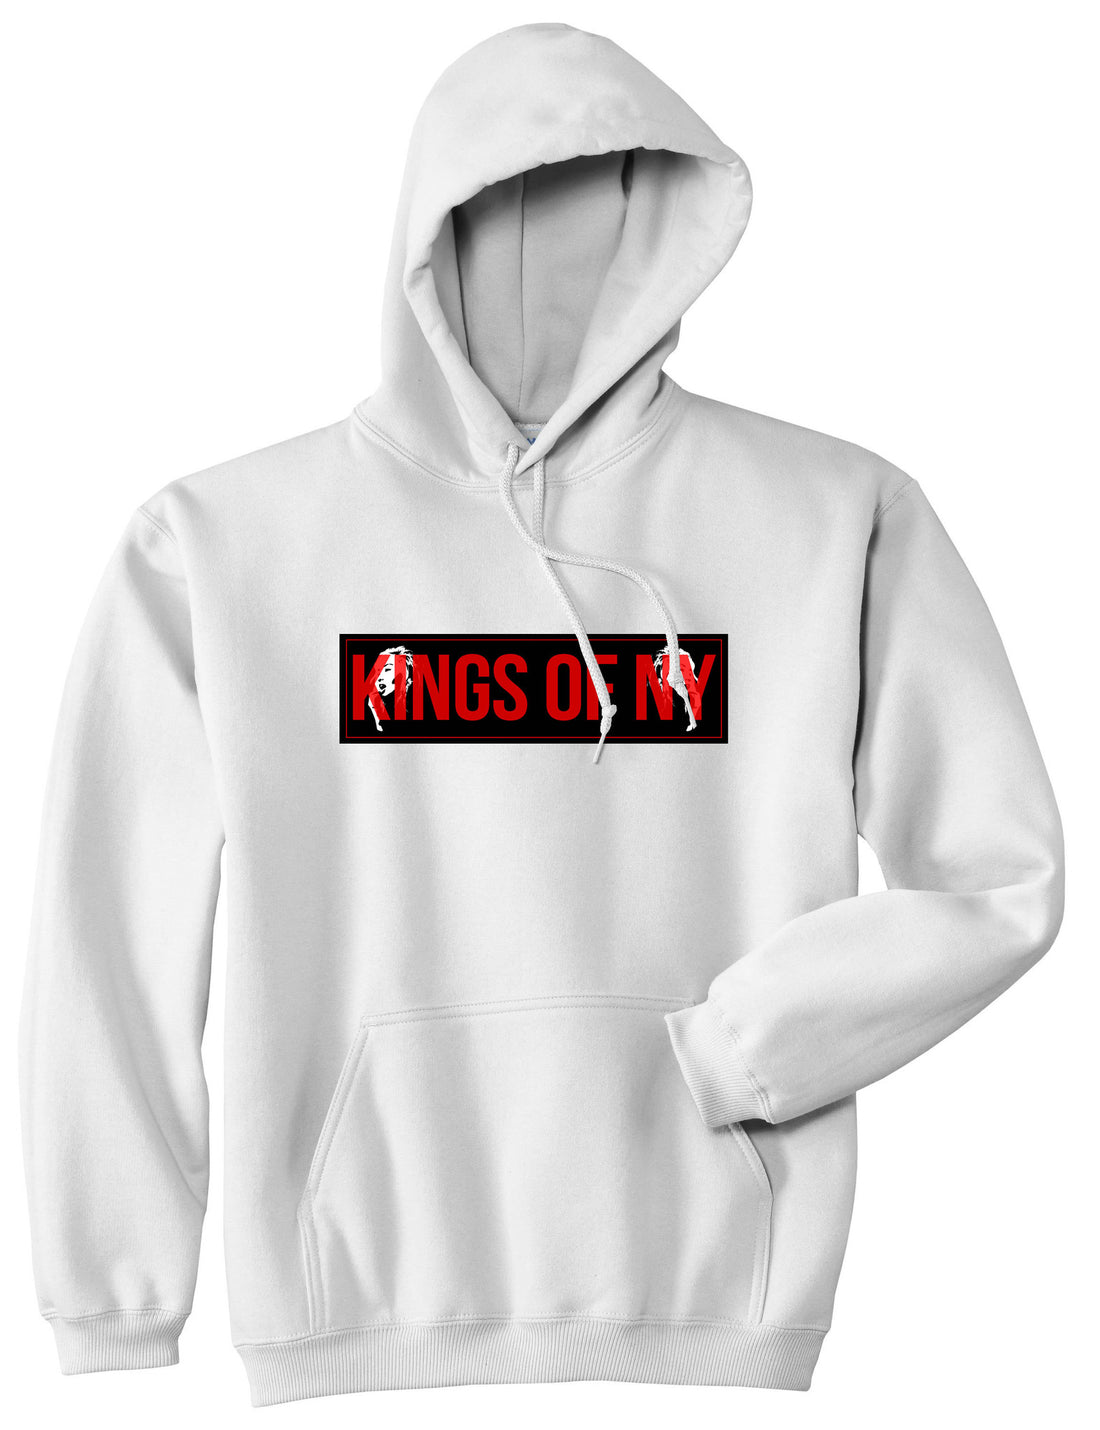 Red Girl Logo Print Pullover Hoodie Hoody in White by Kings Of NY